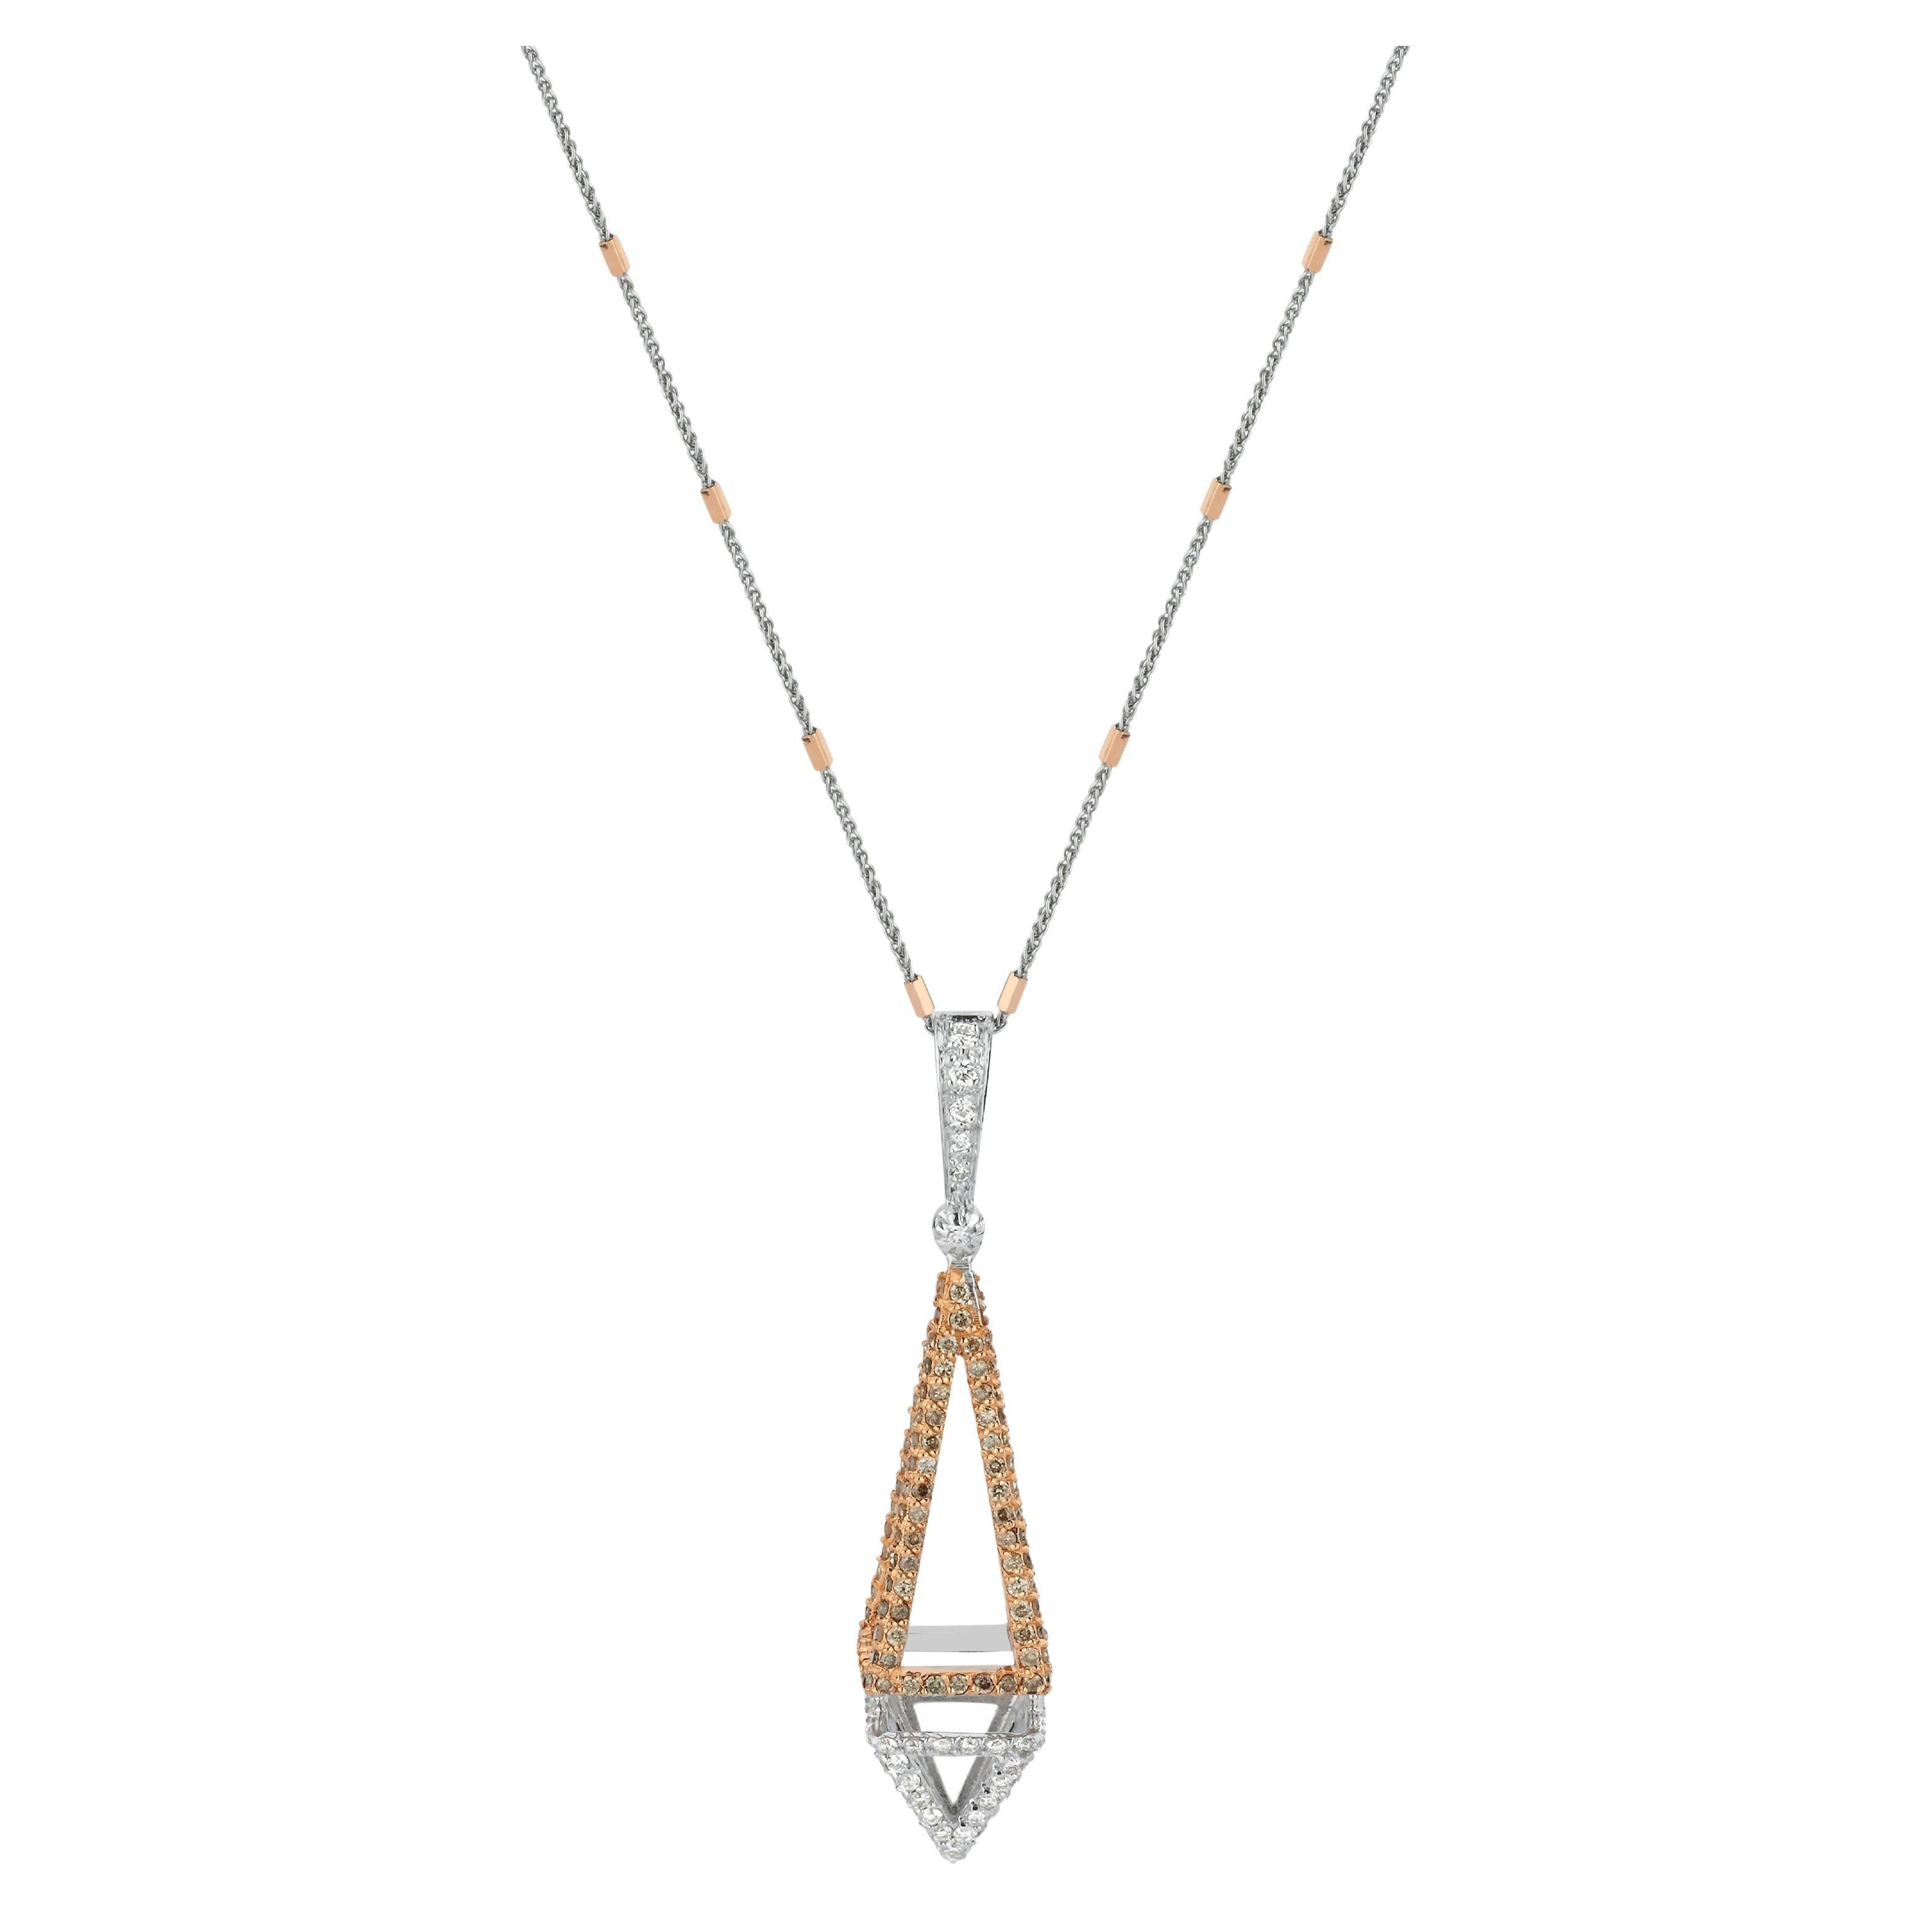  18k Gold Obelisk Necklace with White Diamonds and Champagne Diamonds For Sale